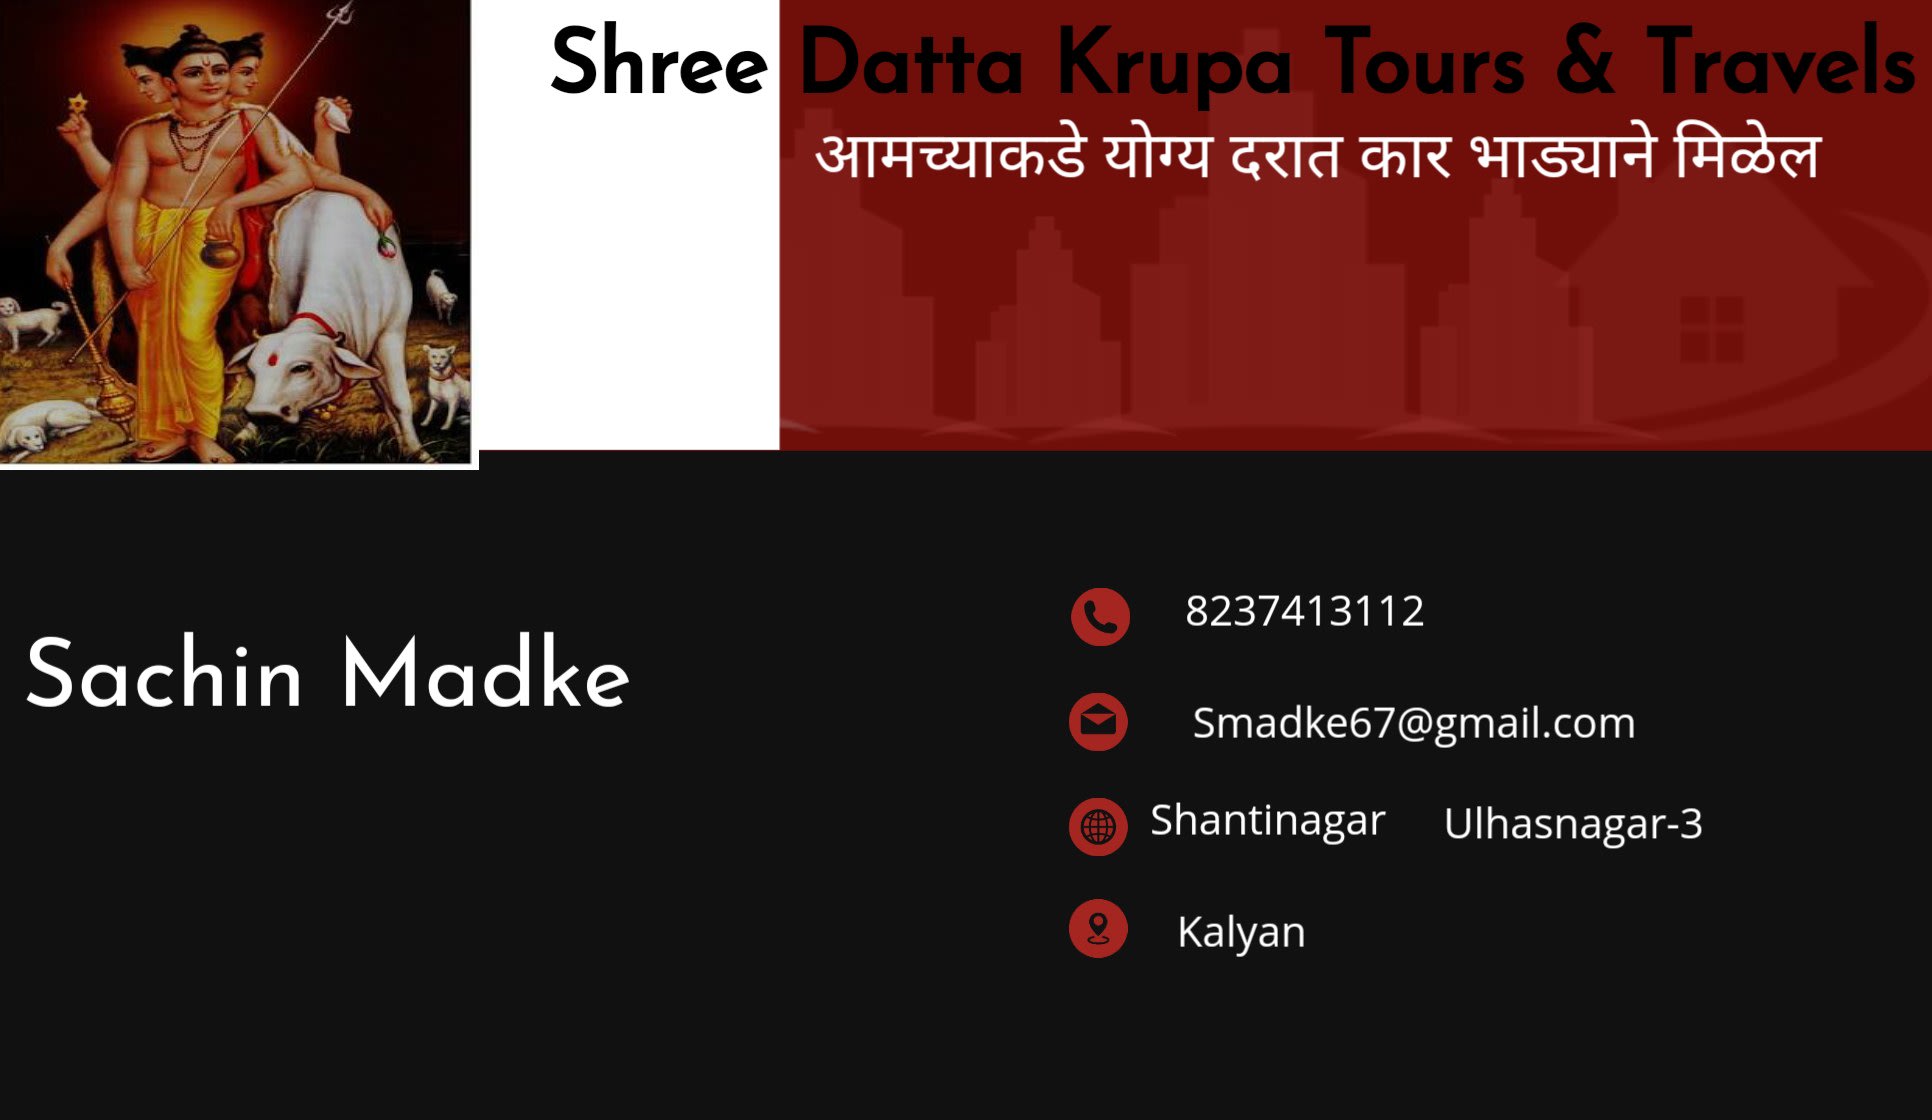 Shree Datta Krupa Tours and Travels